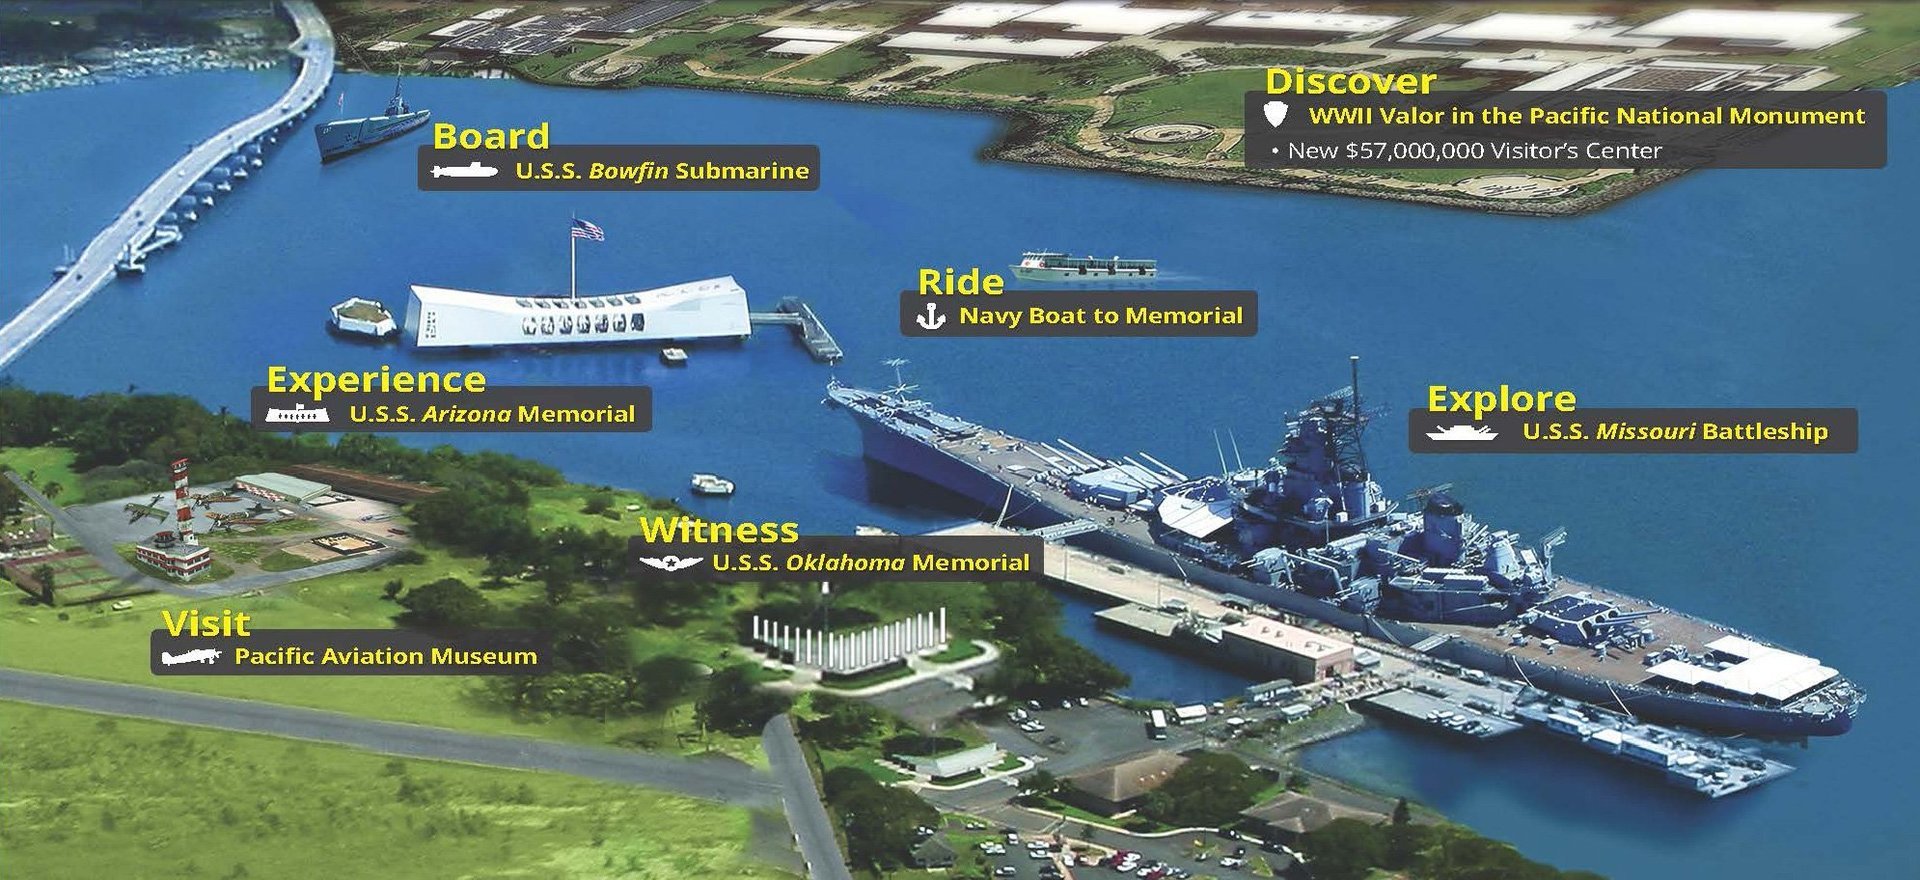 pearl harbor today map